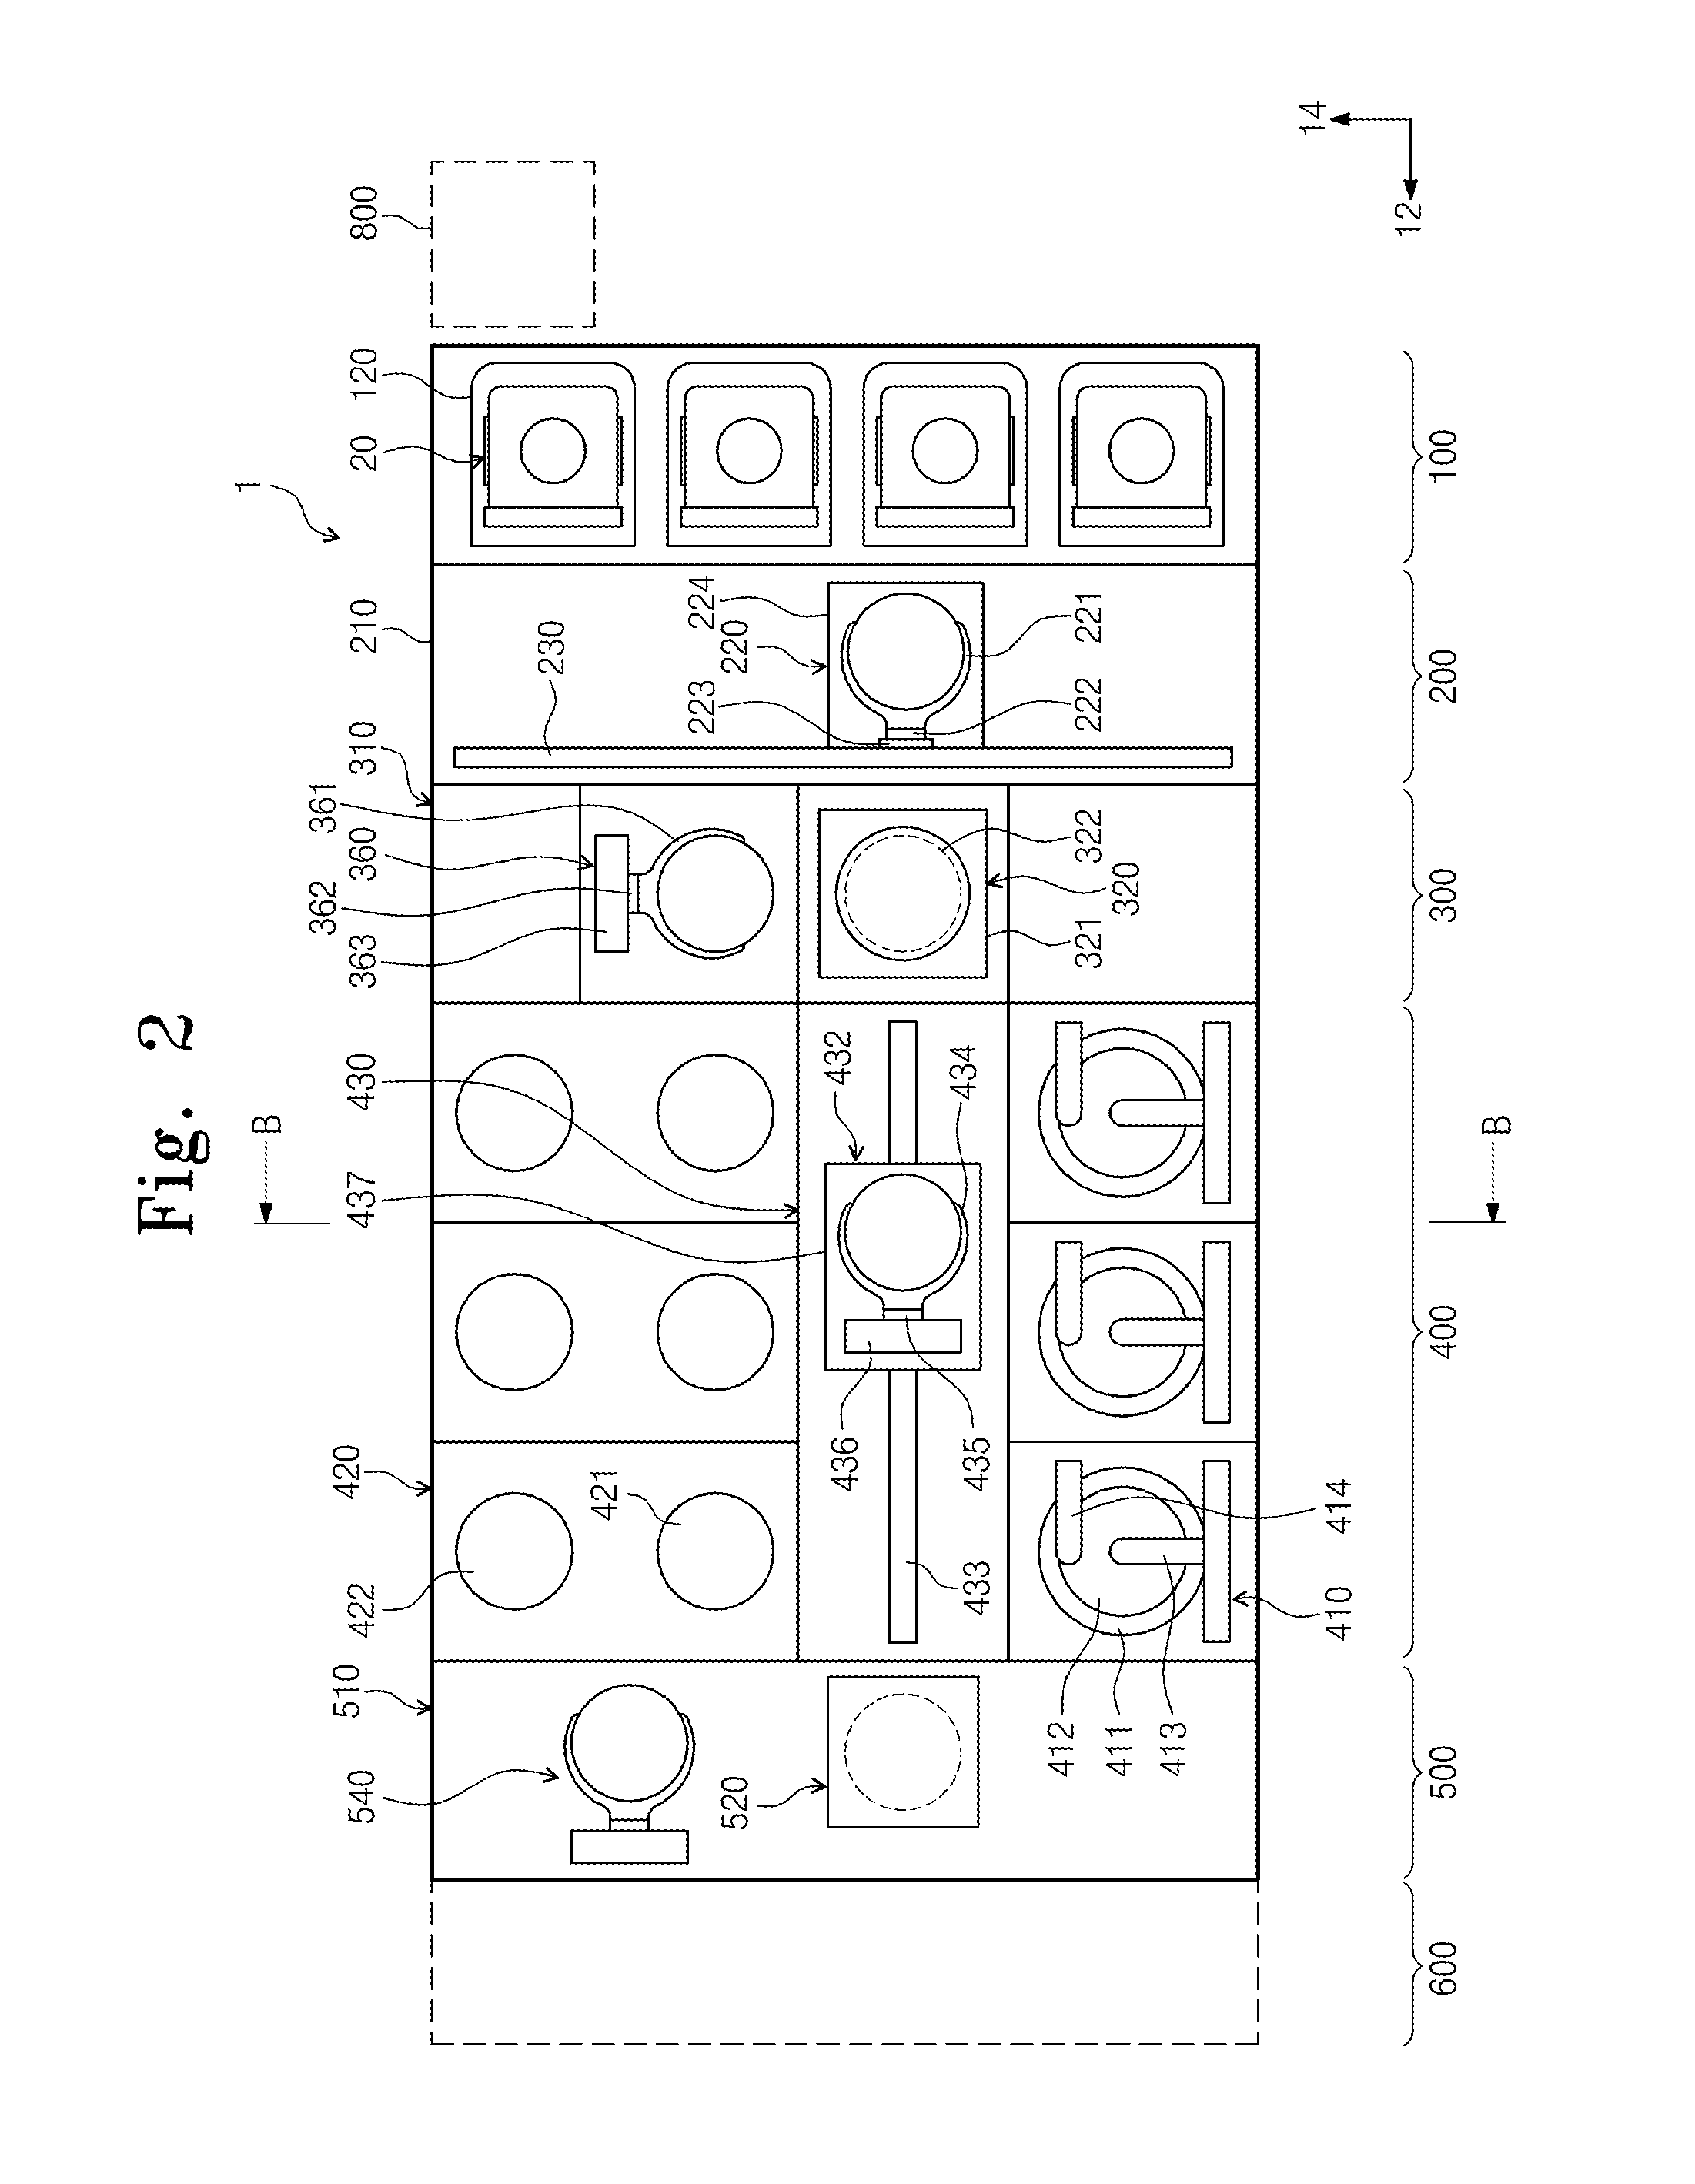 Facility and method for treating substrate